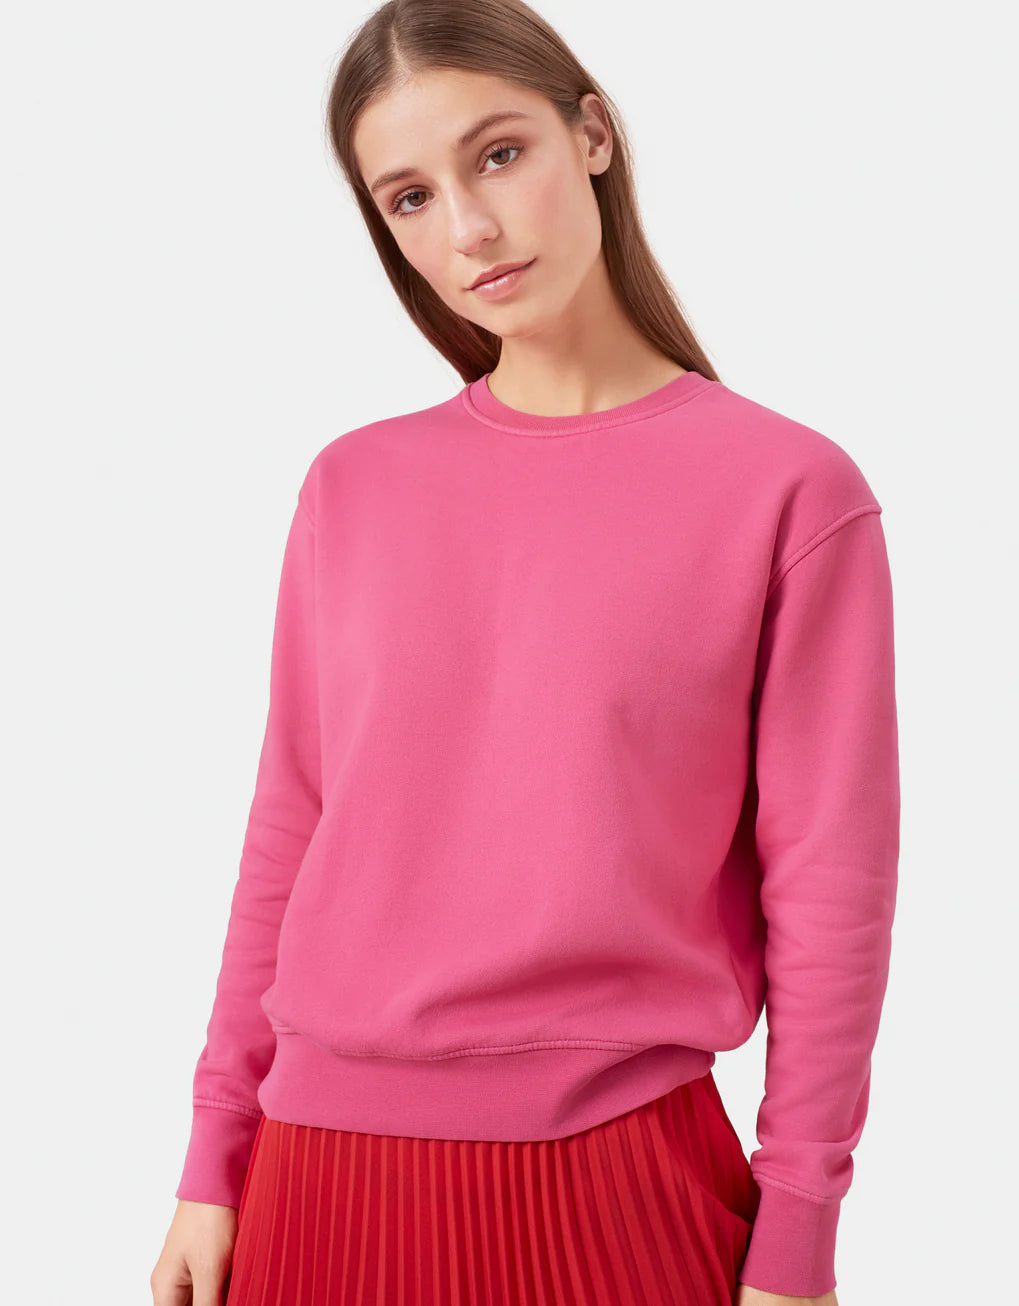 The model is wearing a pink Classic Organic Crew sweatshirt made by Colorful Standard.